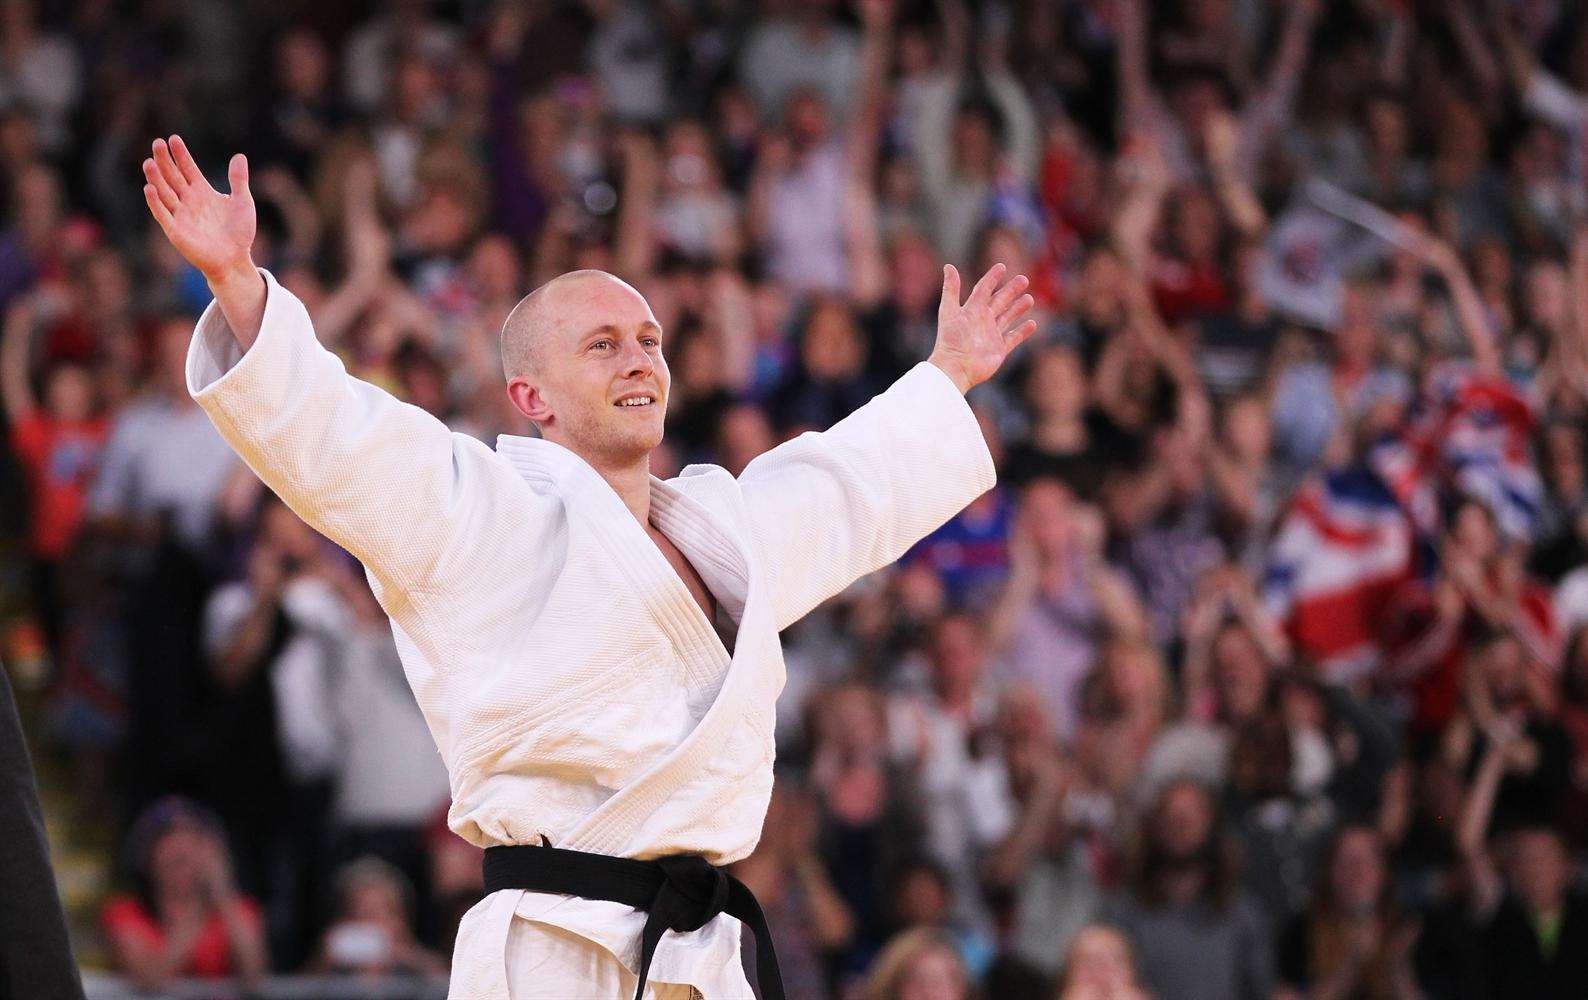 Ben Quilter, who won bronze in the men's 60kg Judo at the London Paralympic Games. Picture: Lynne Cameron/PA Wire